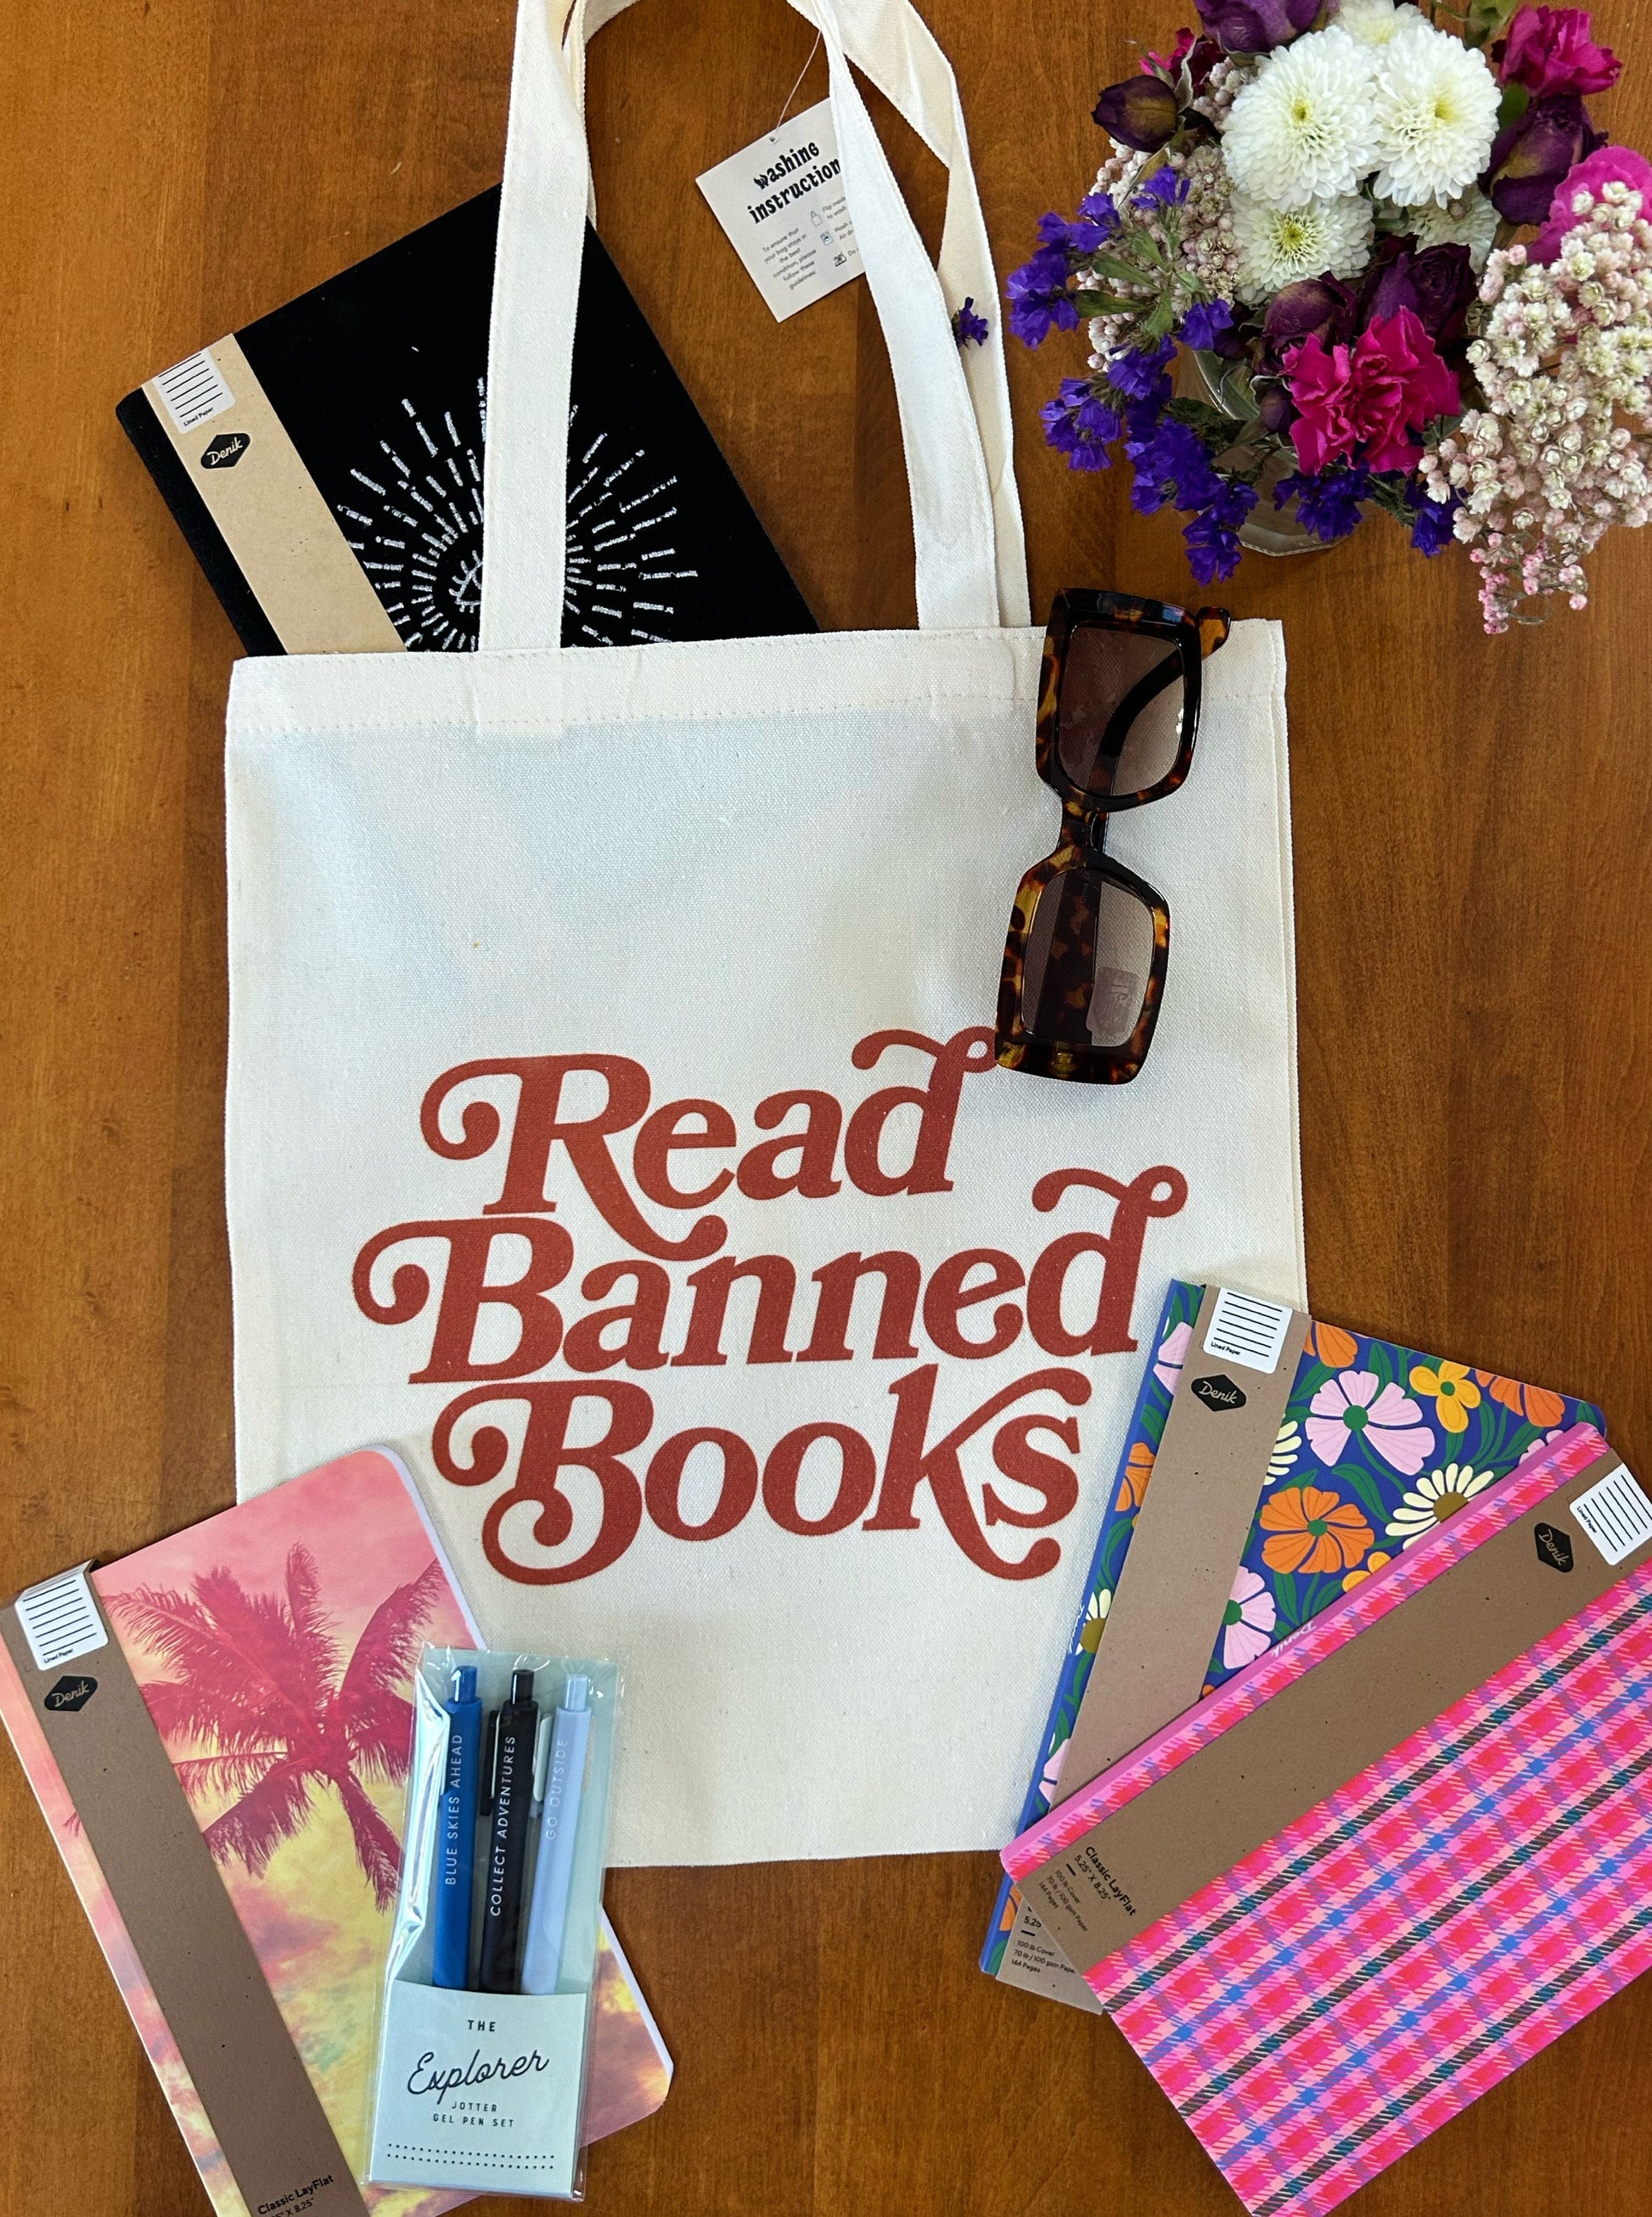 Read banned books 15"x16" canvas tote bag. 